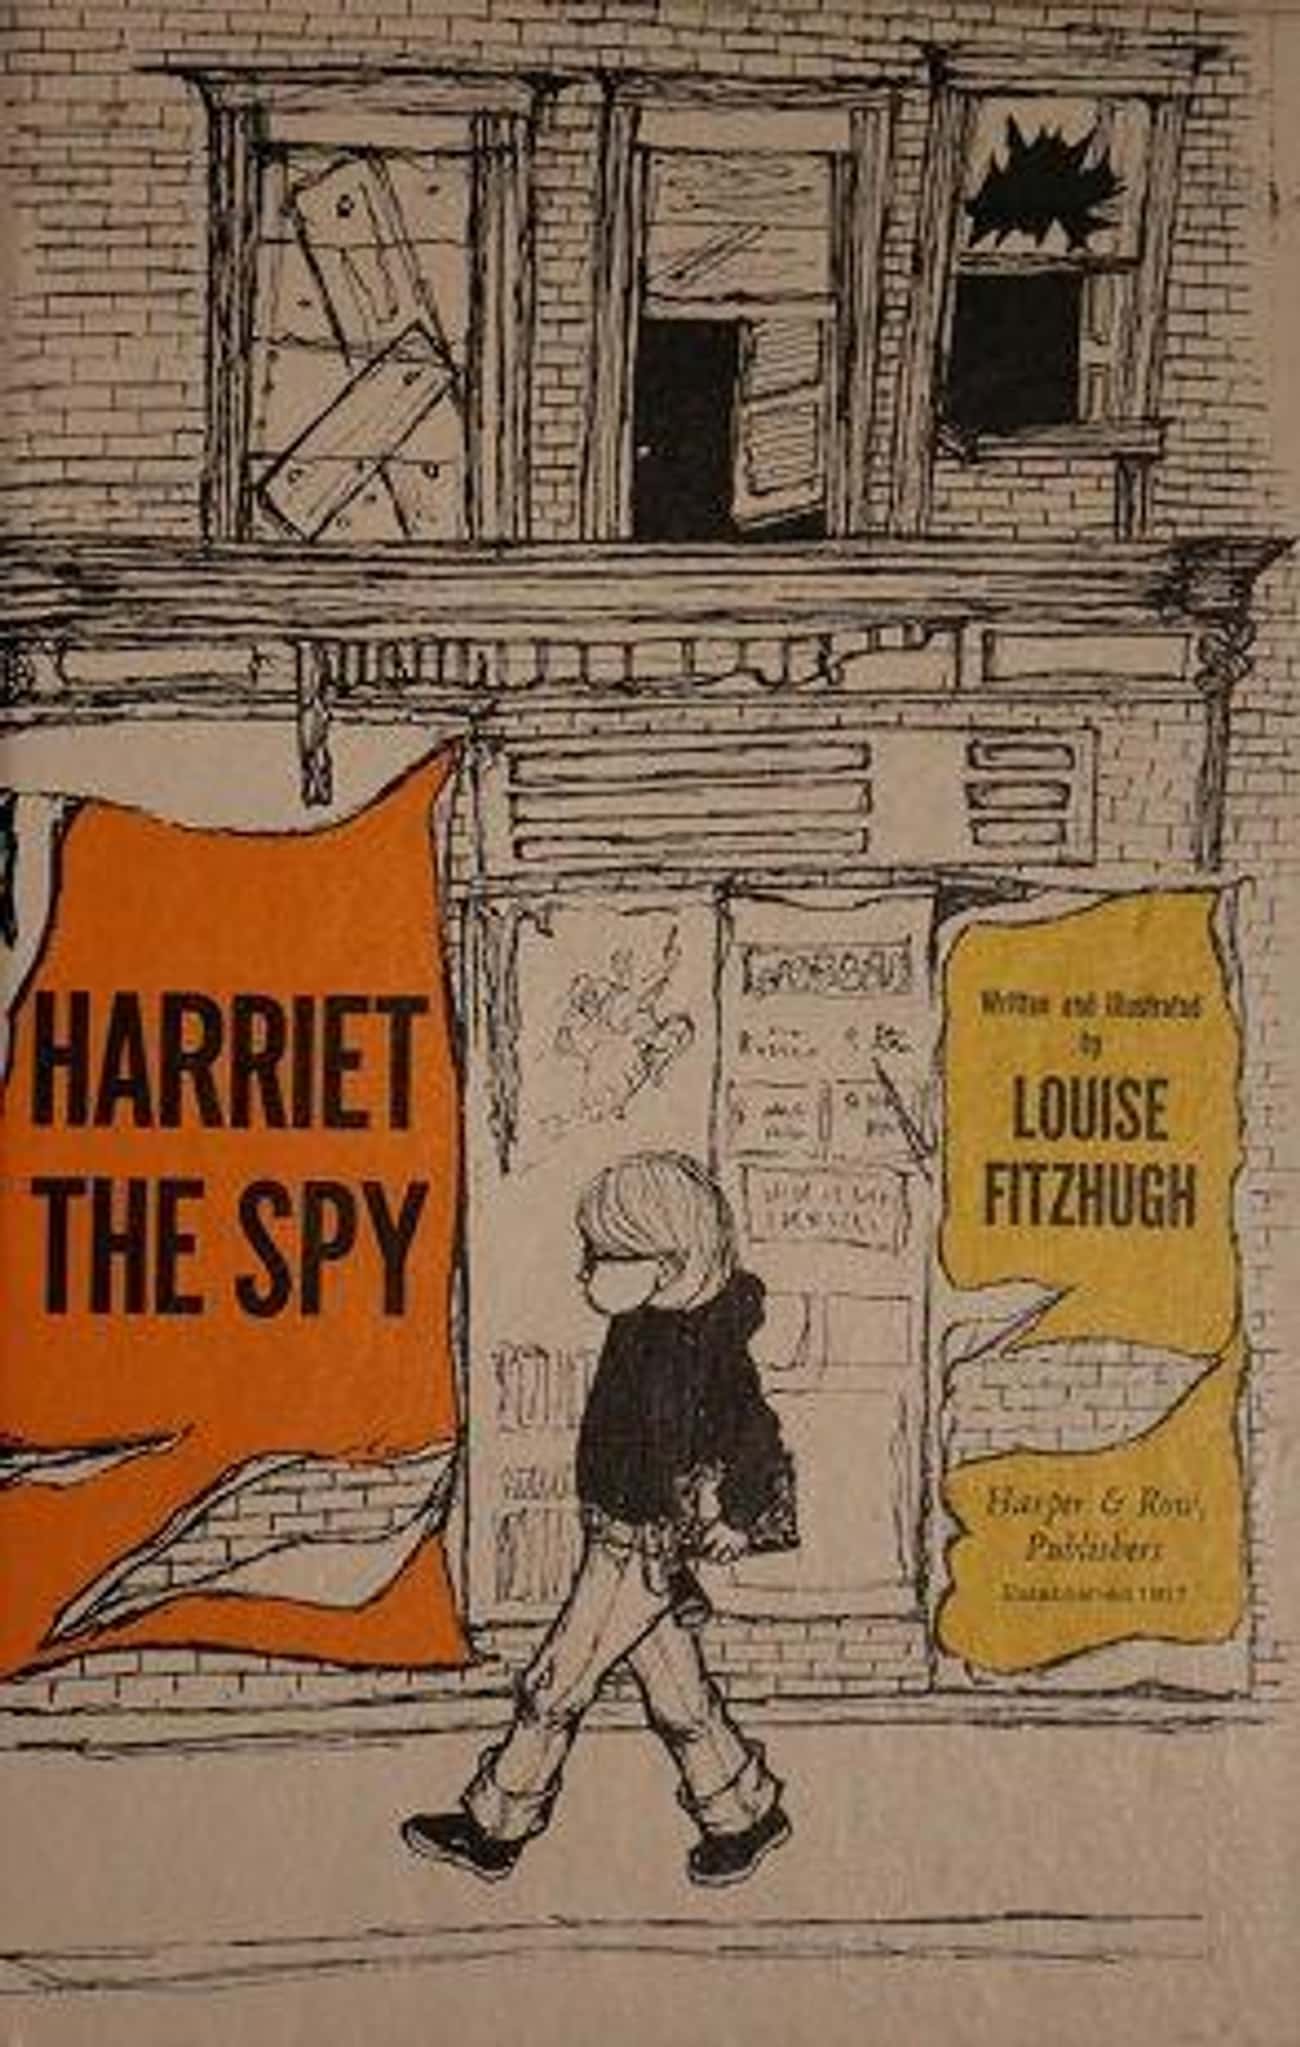 Harriet The Spy Promotes Childhood Delinquency